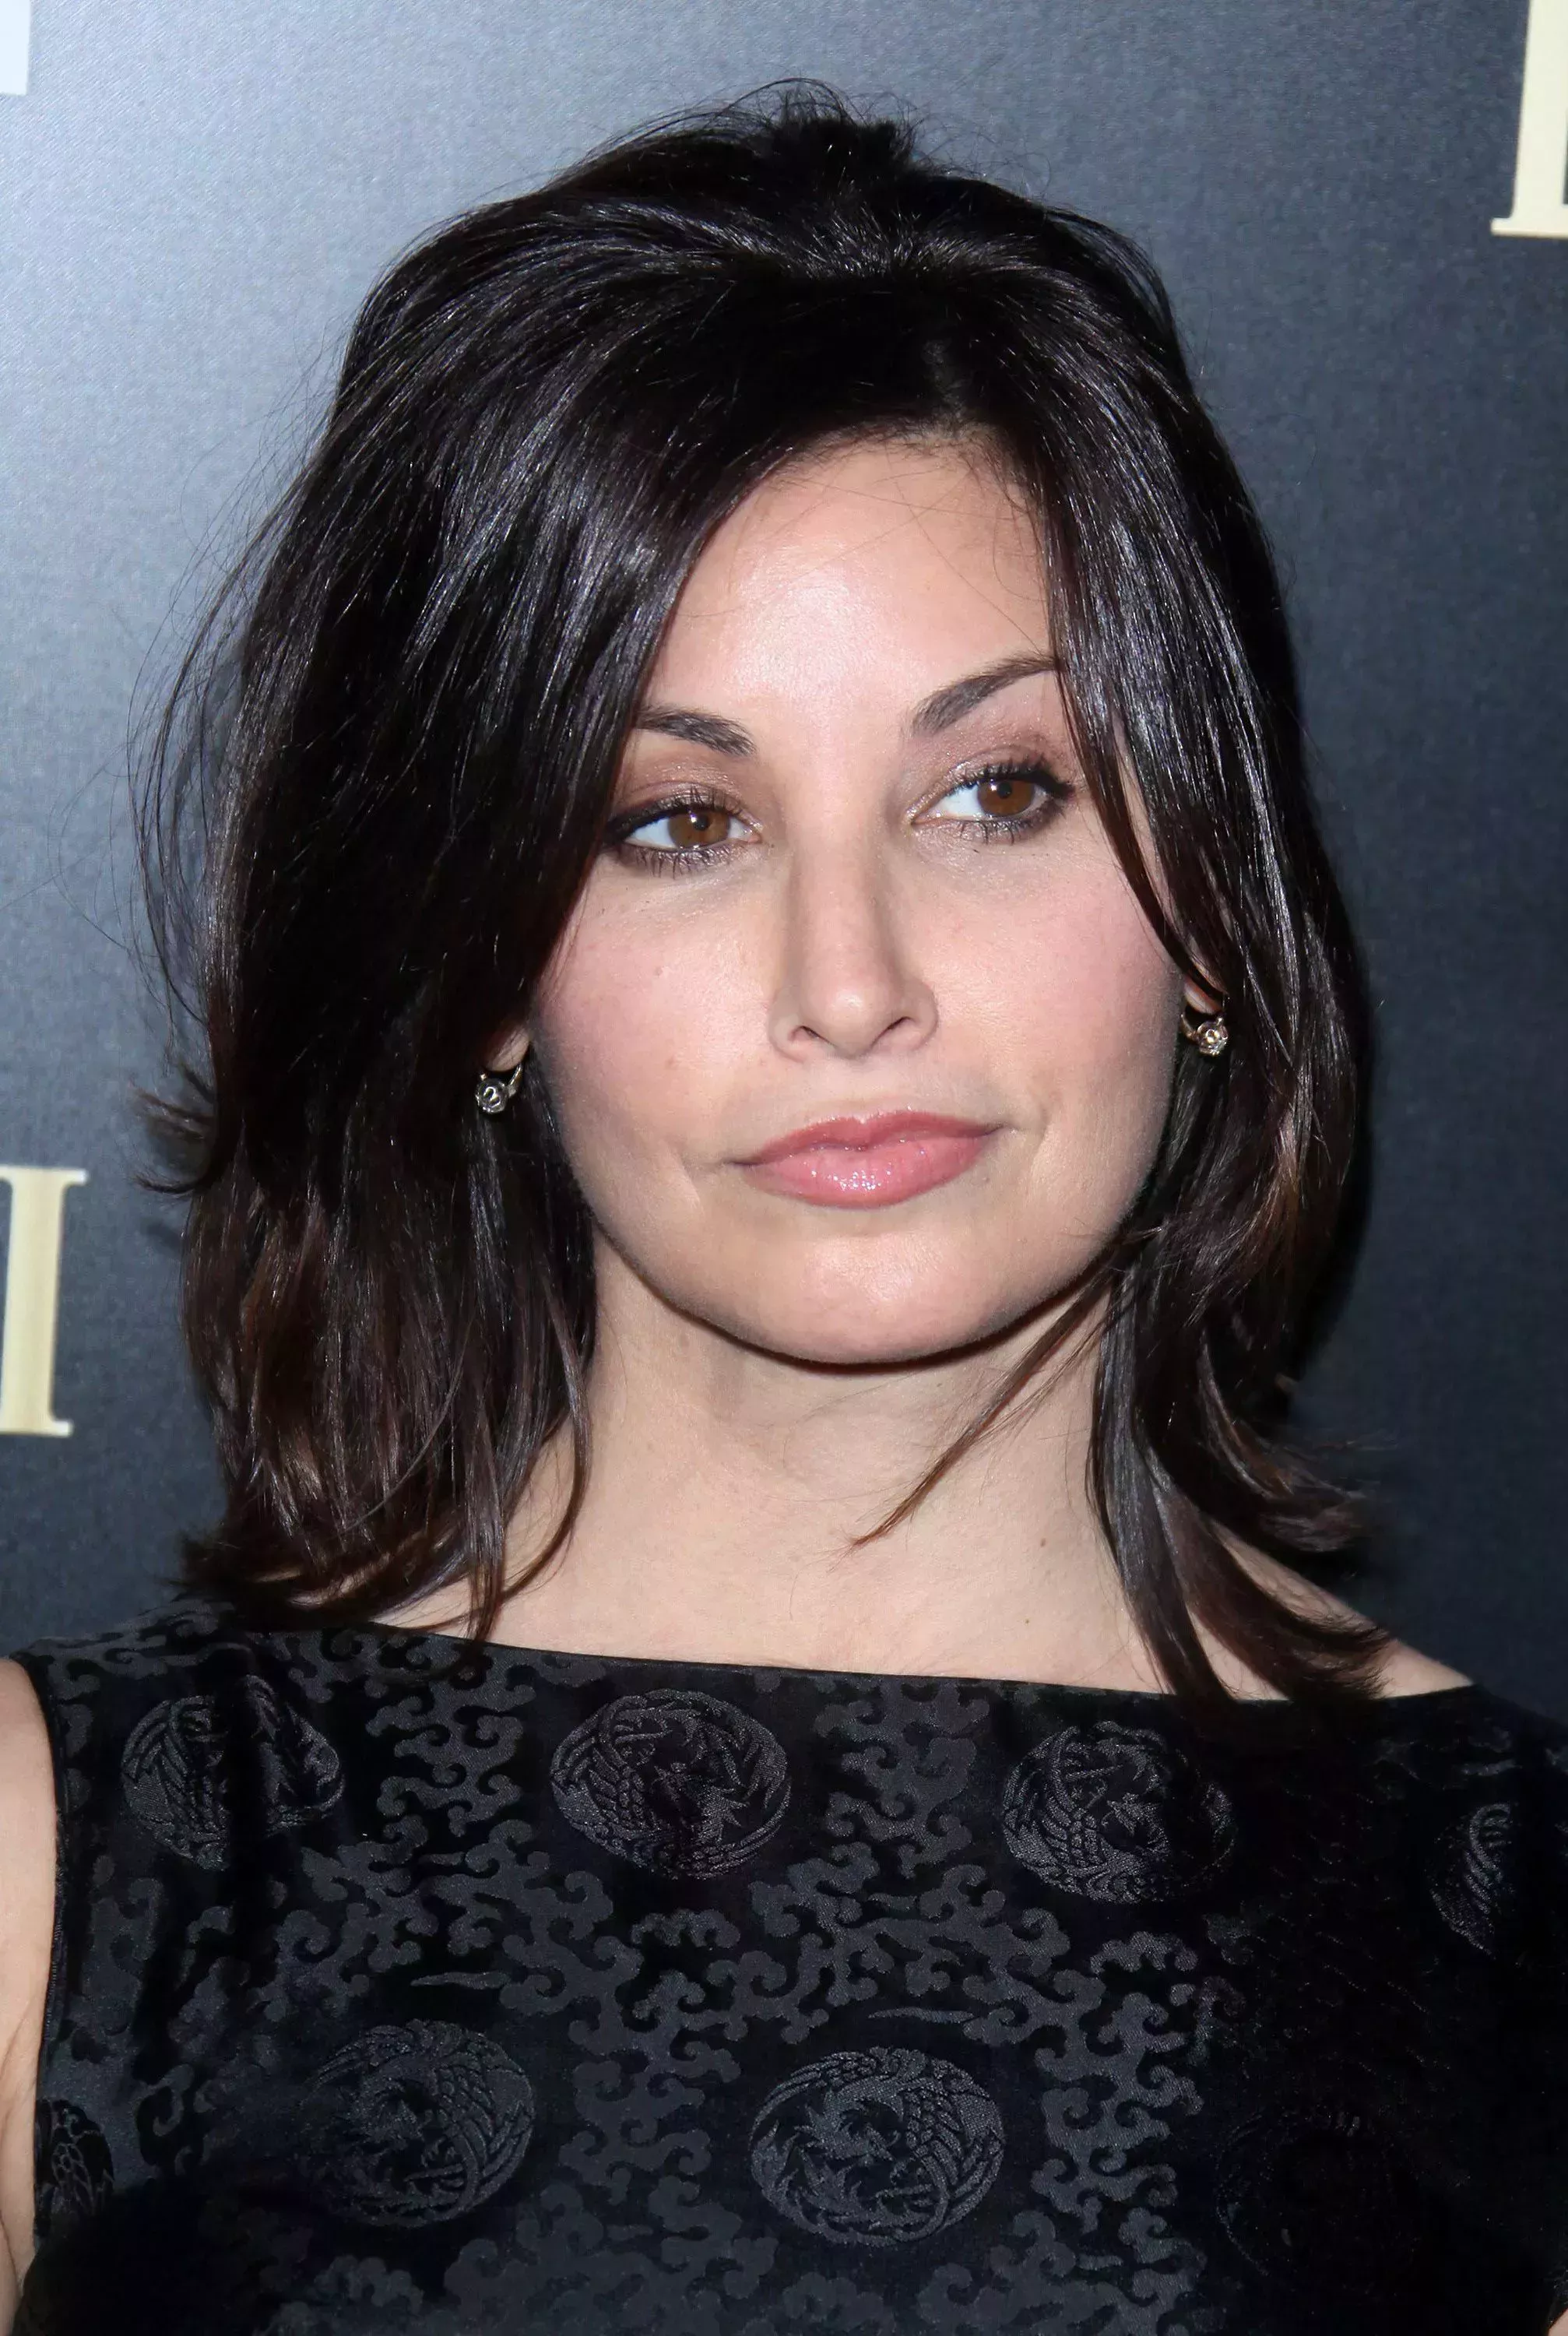 Fluffed Shag with Twin Fringe by Gina Gershon